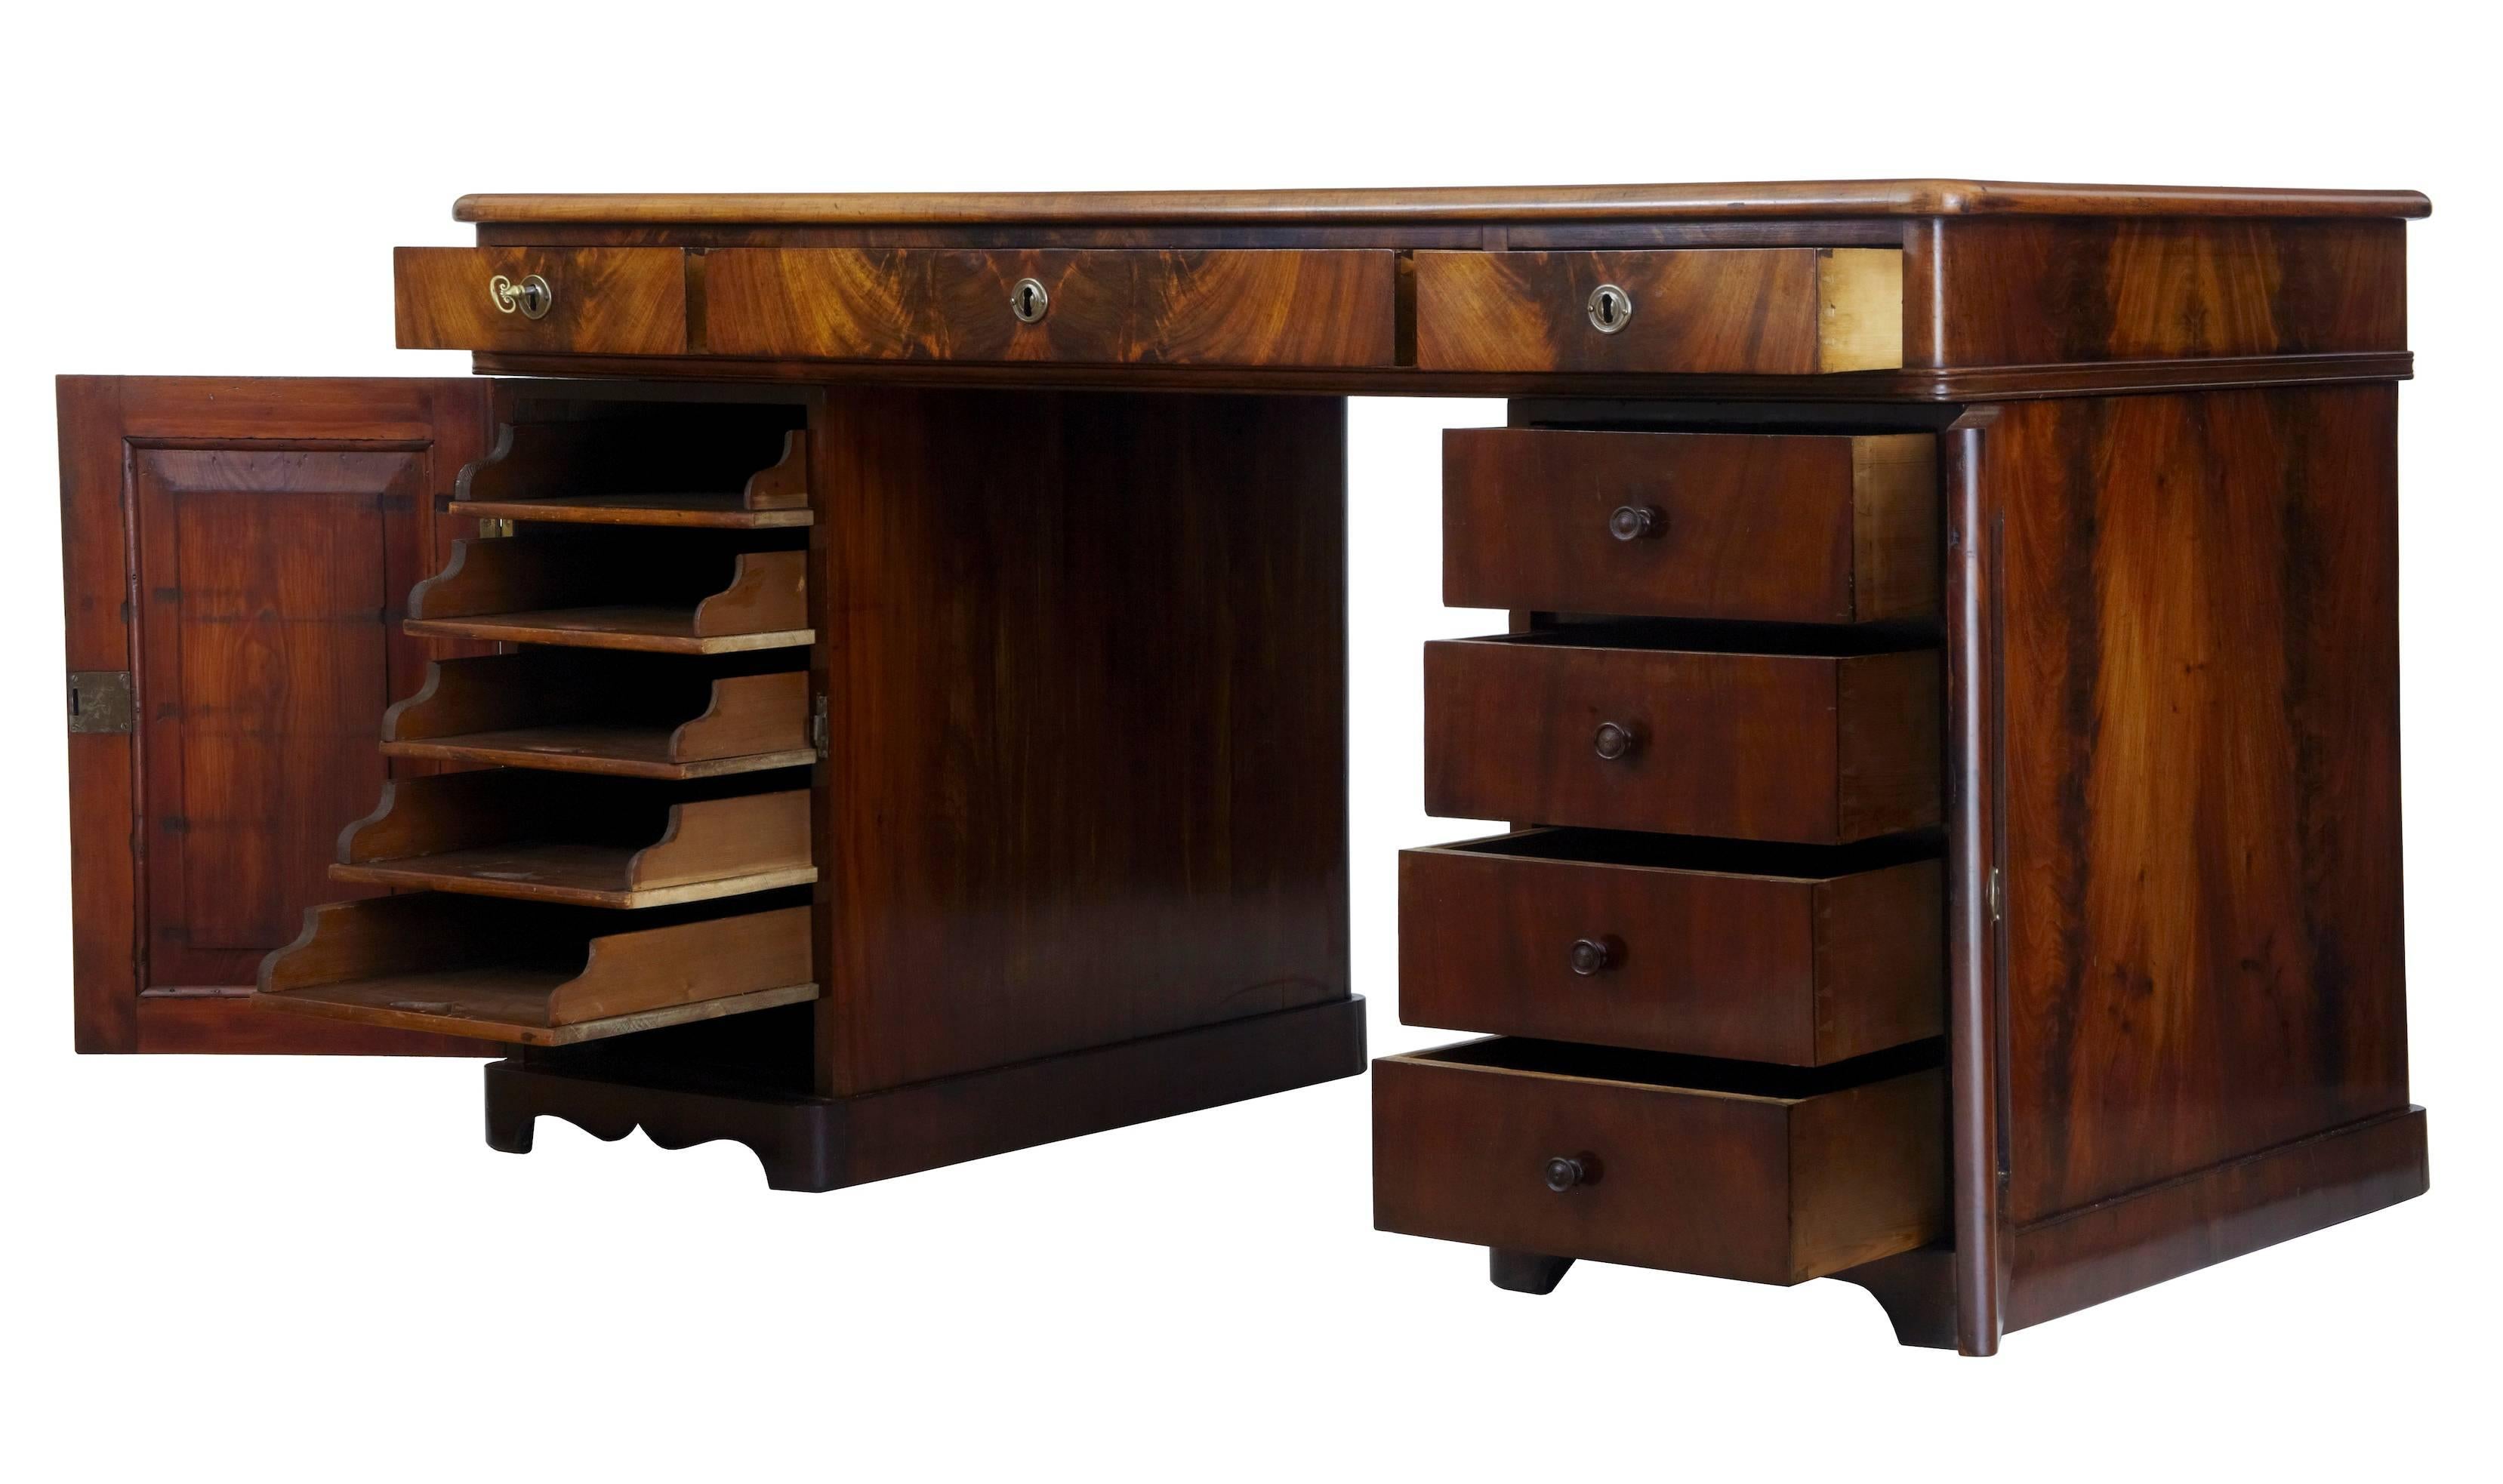 Good quality mahogany three-part pedestal desk, circa 1850.
Three drawers in the top, four fitted drawers in the right side and five slide drawers in the left pedestal.
Currently fitted with a leather that would benefit from being